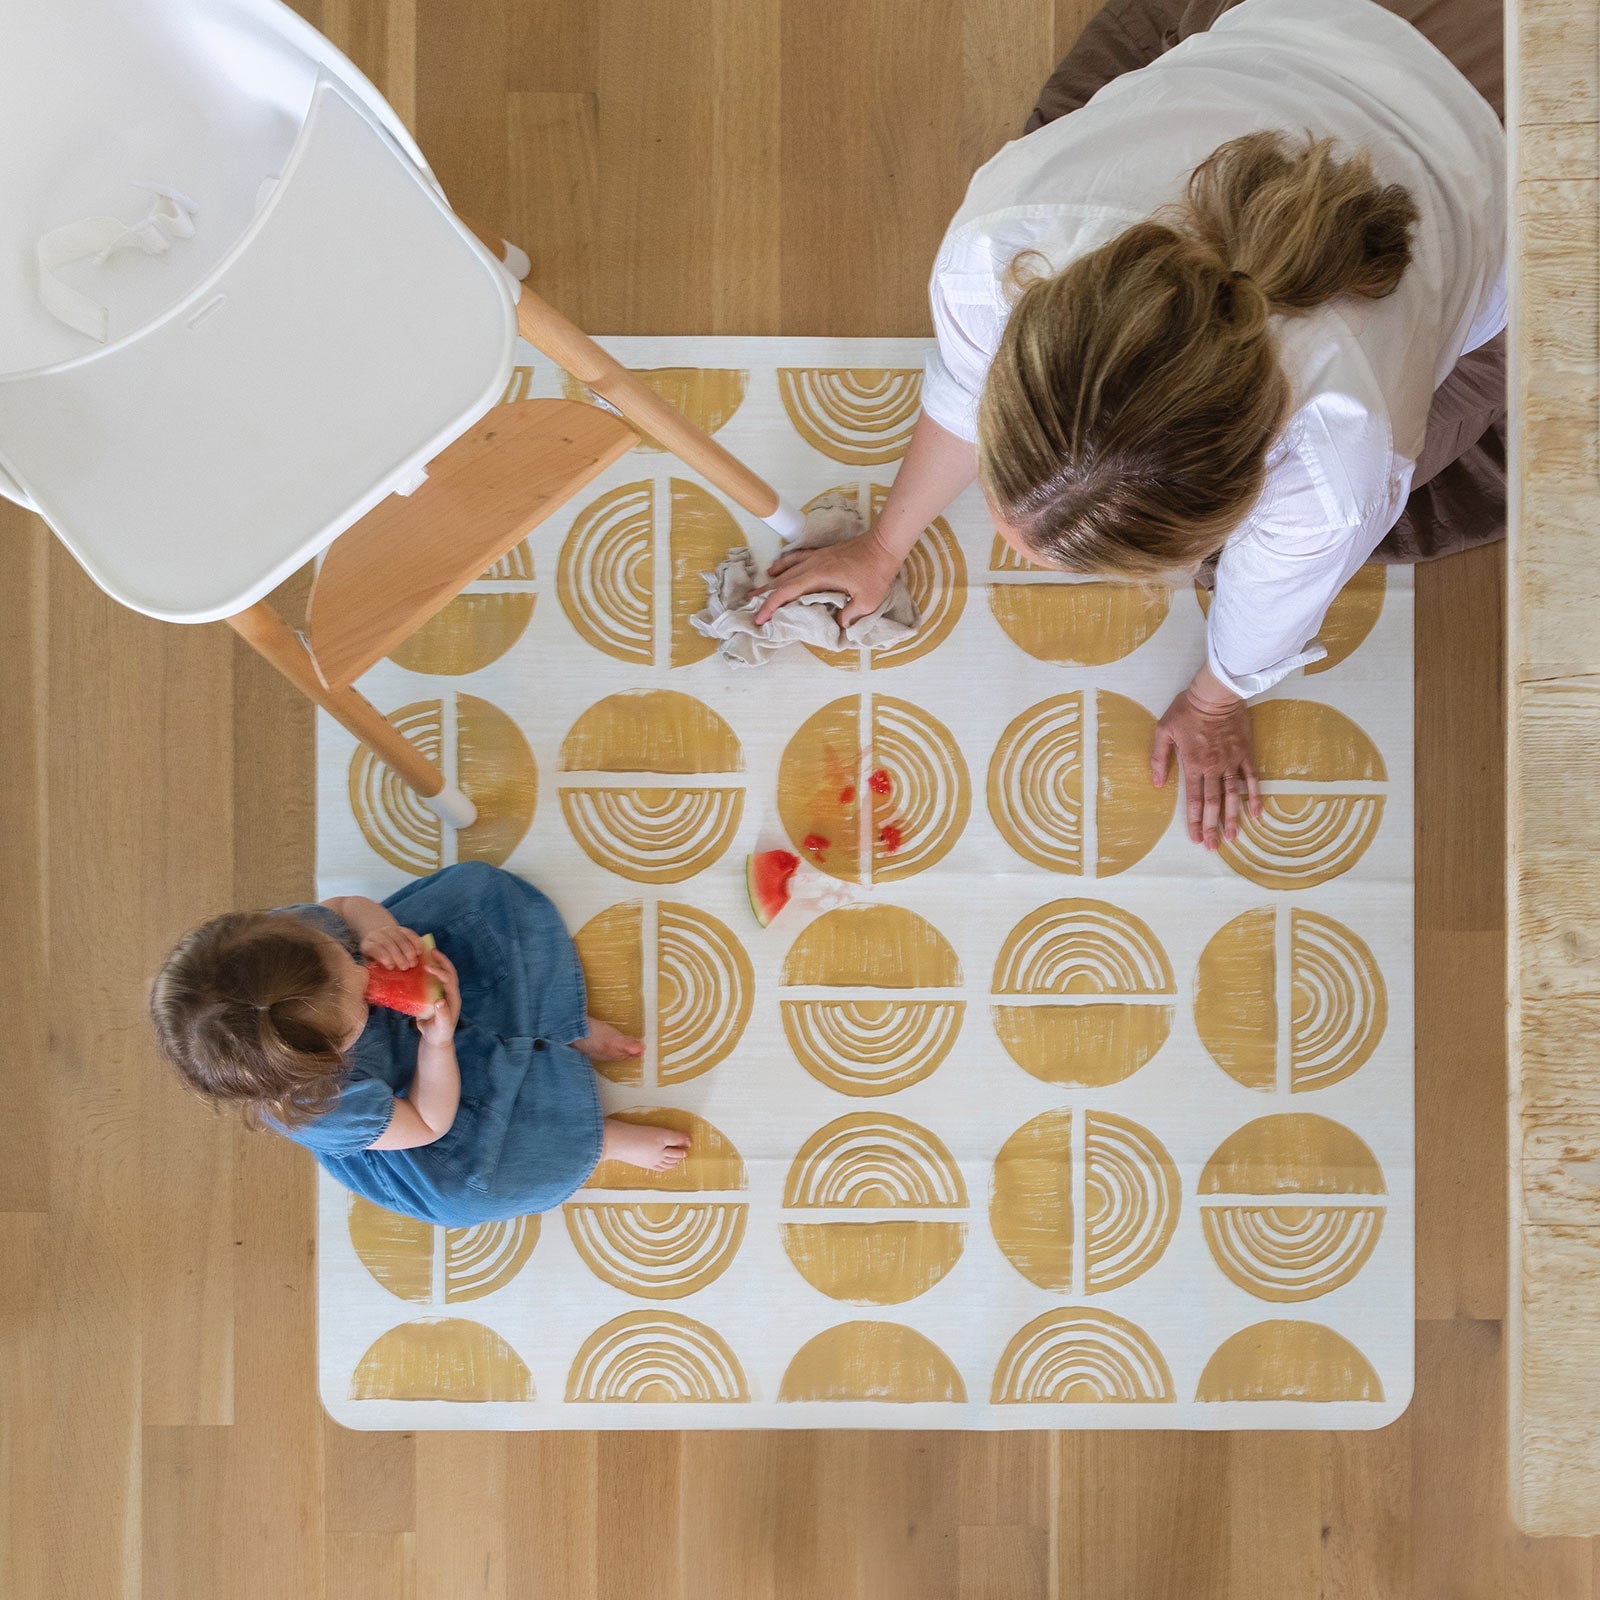 Ada modern minimalist baby high chair mat in Sunflower, mustard yellow and off white. Shot from above with a baby, high chair, and mom cleaning up a spill.